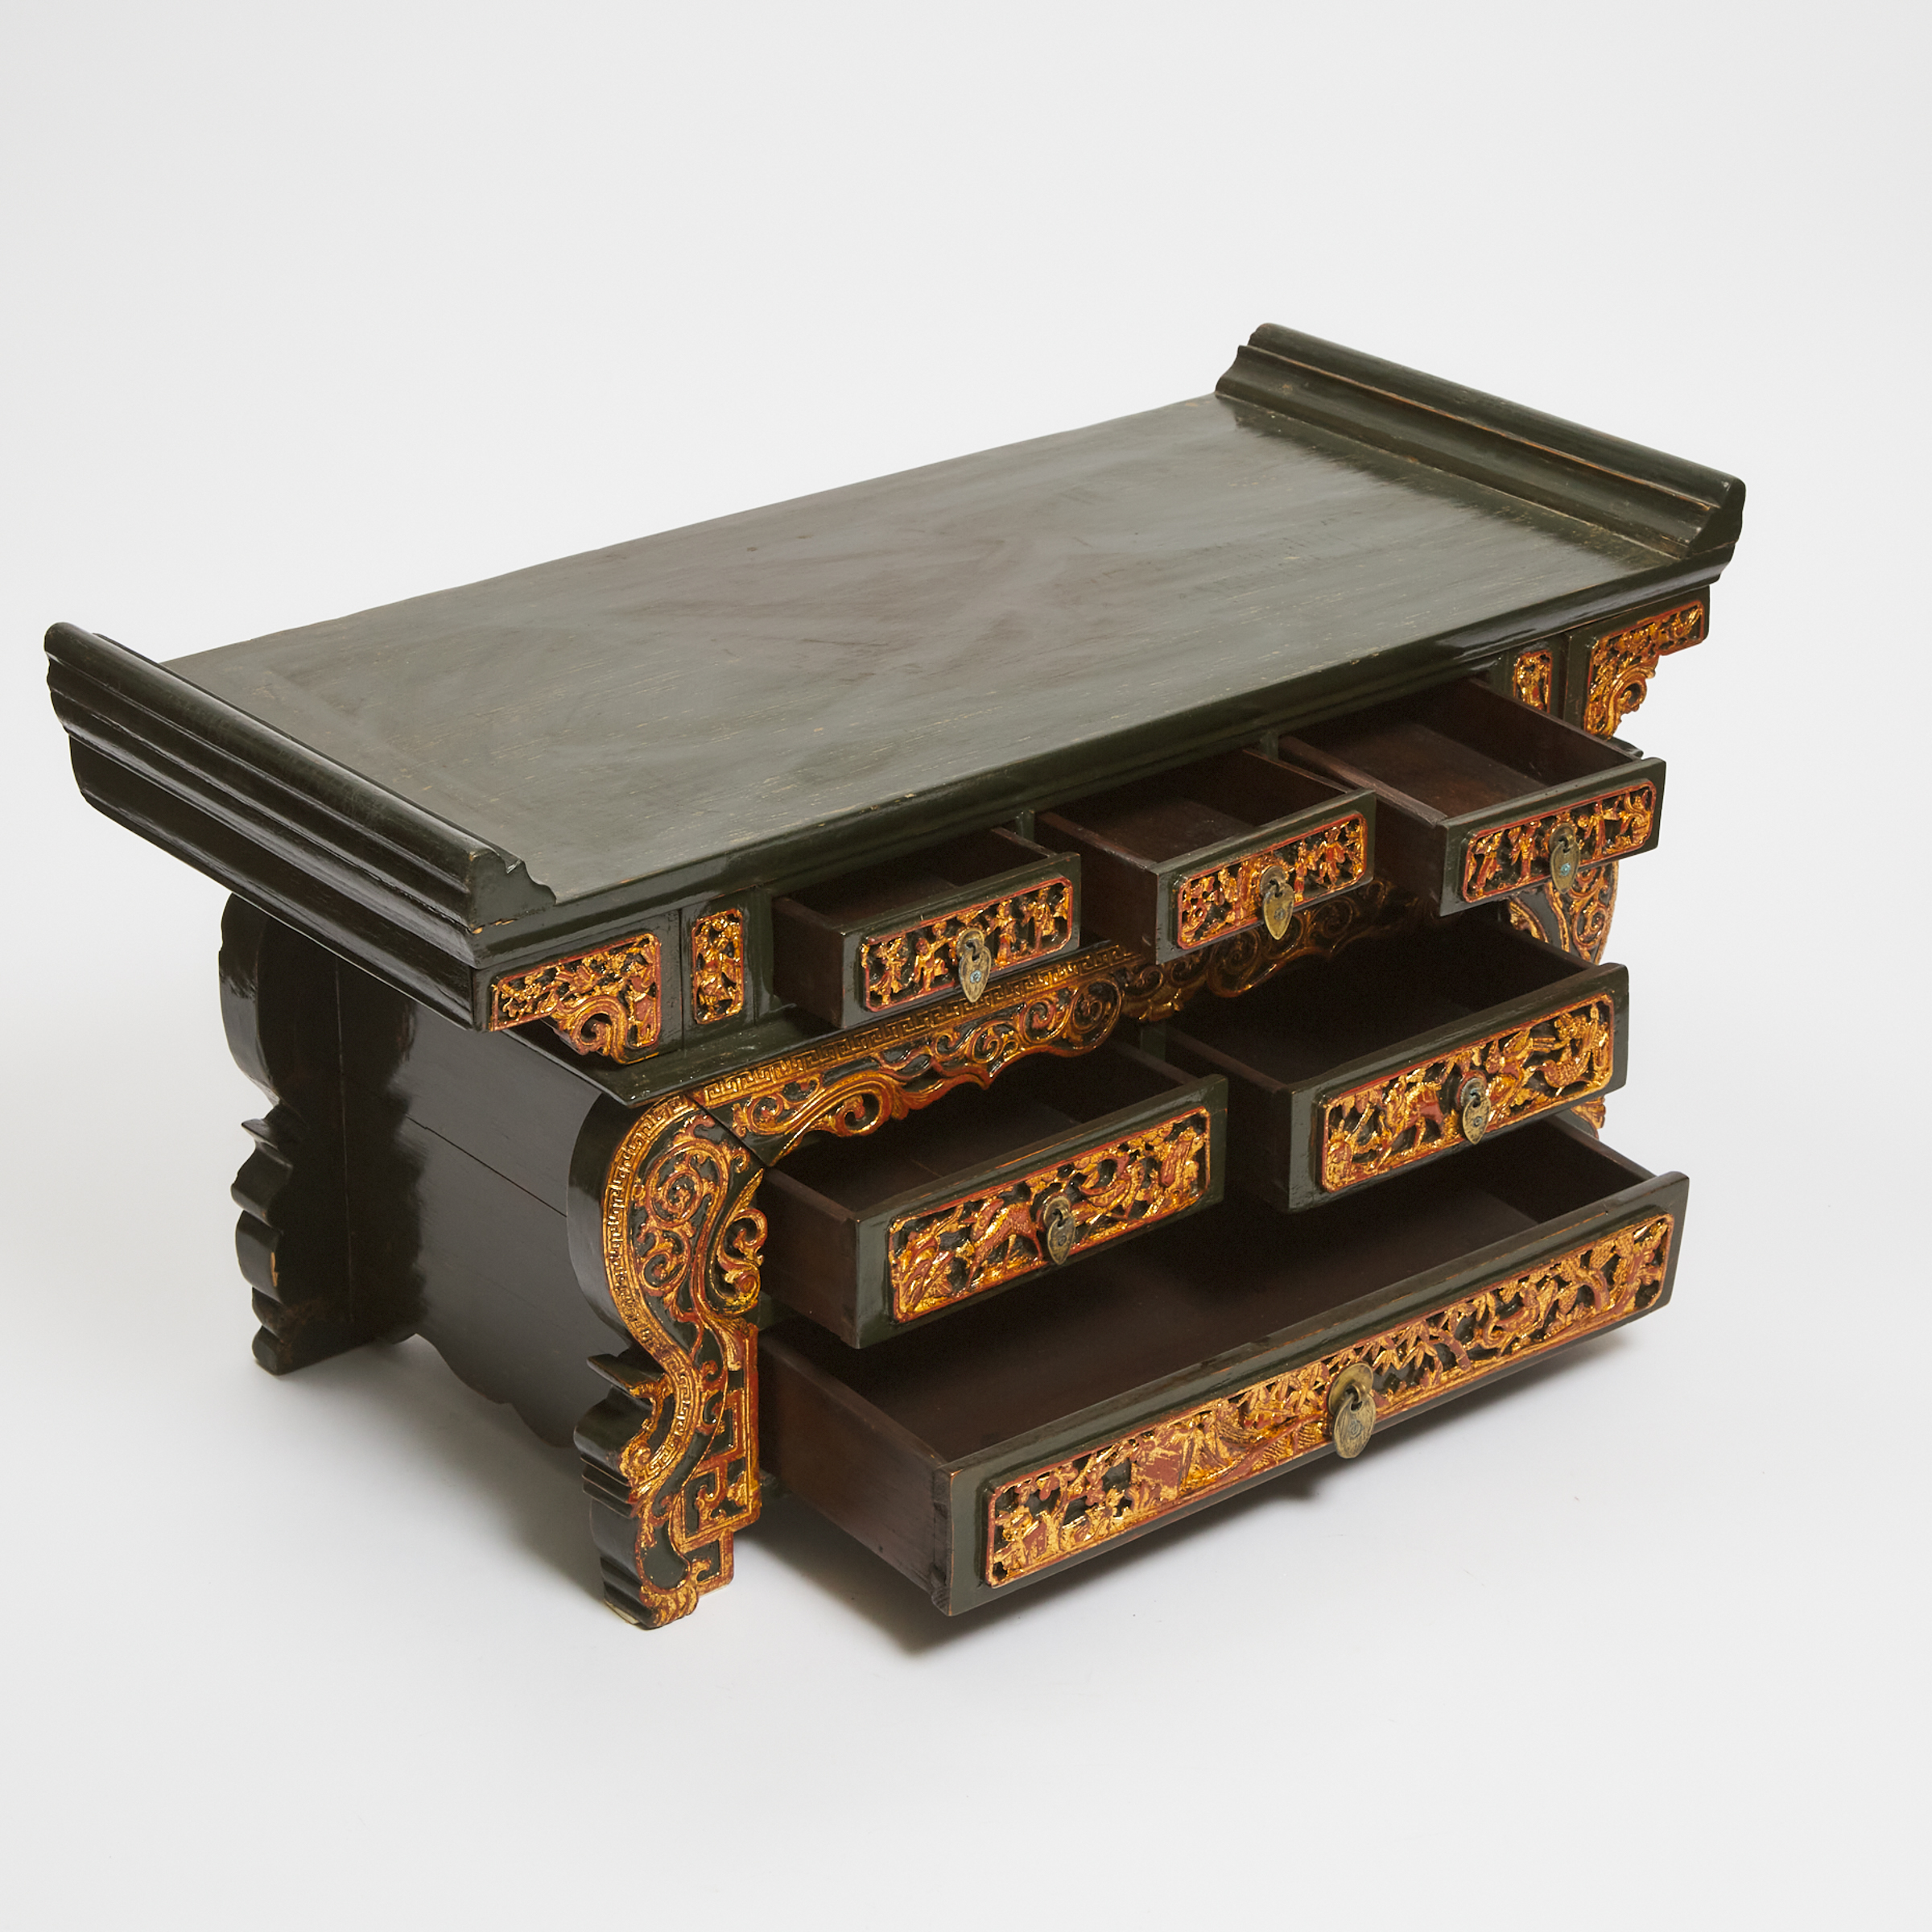 A Small Chinese Lacquered Altar Coffer, Qing Dynasty, 19th Century